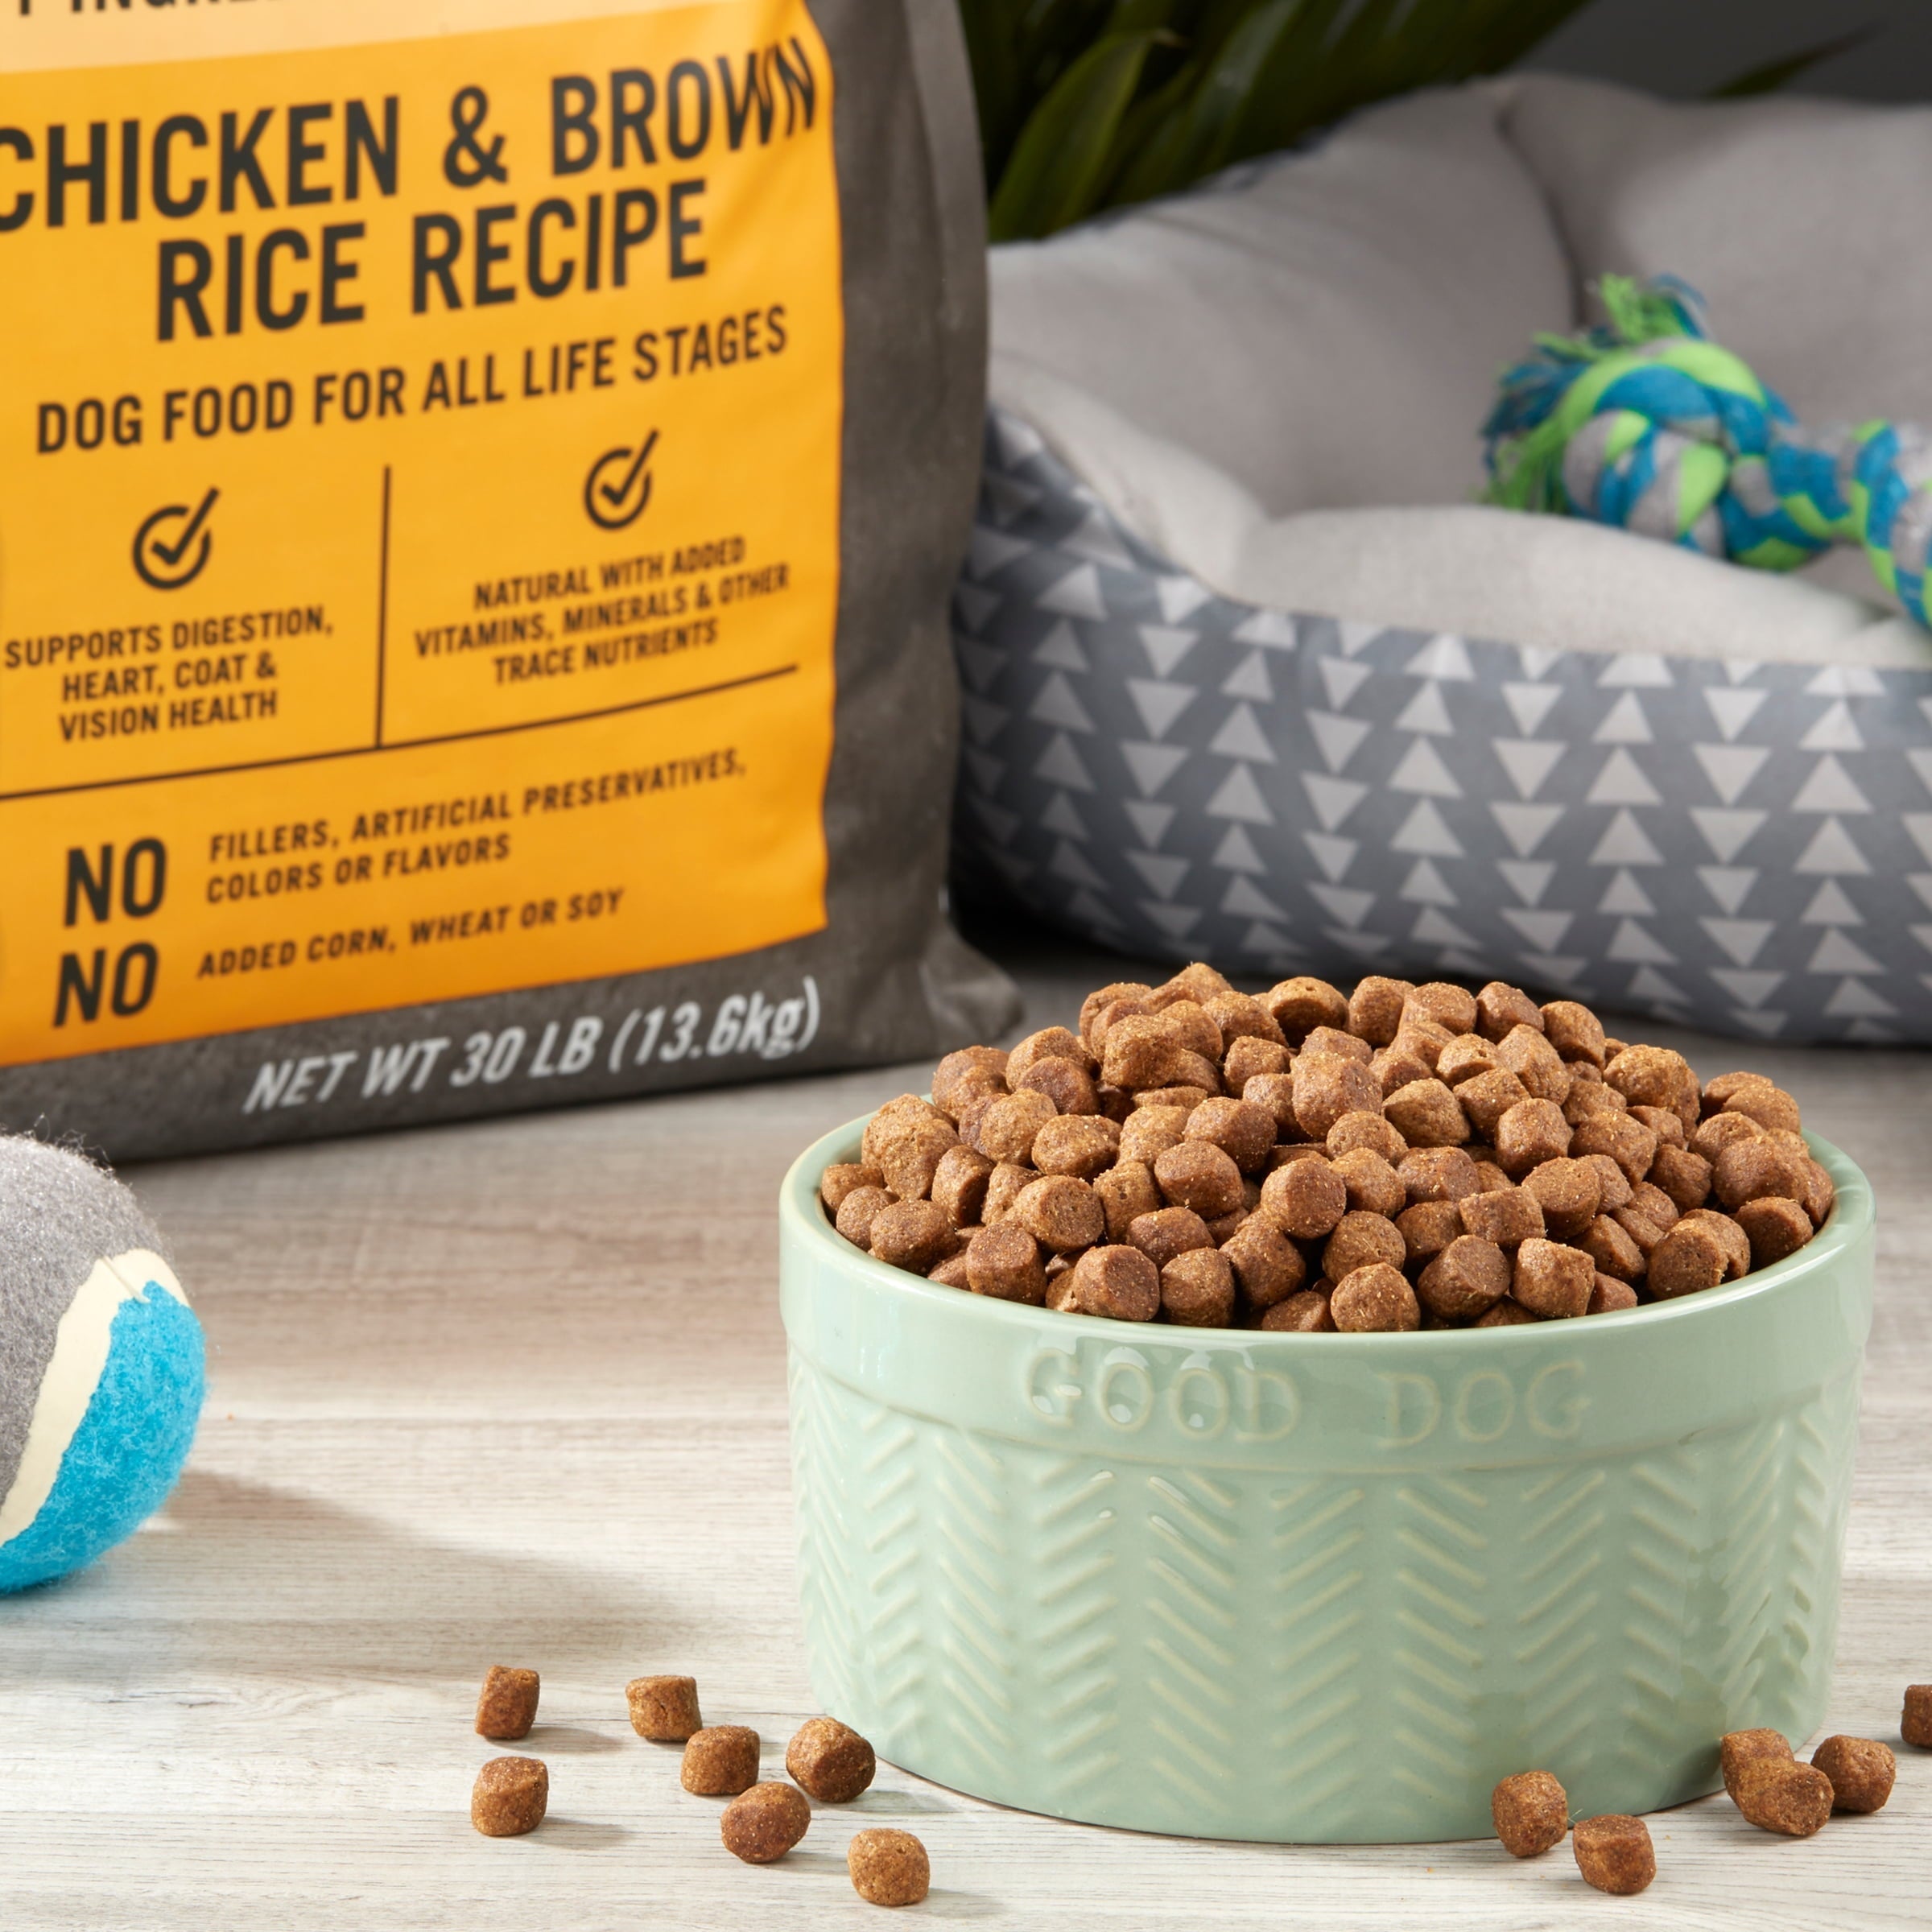 Wholesale prices with free shipping all over United States Pure Balance Chicken & Brown Rice Recipe Dry Dog Food, 30 lbs - Steven Deals